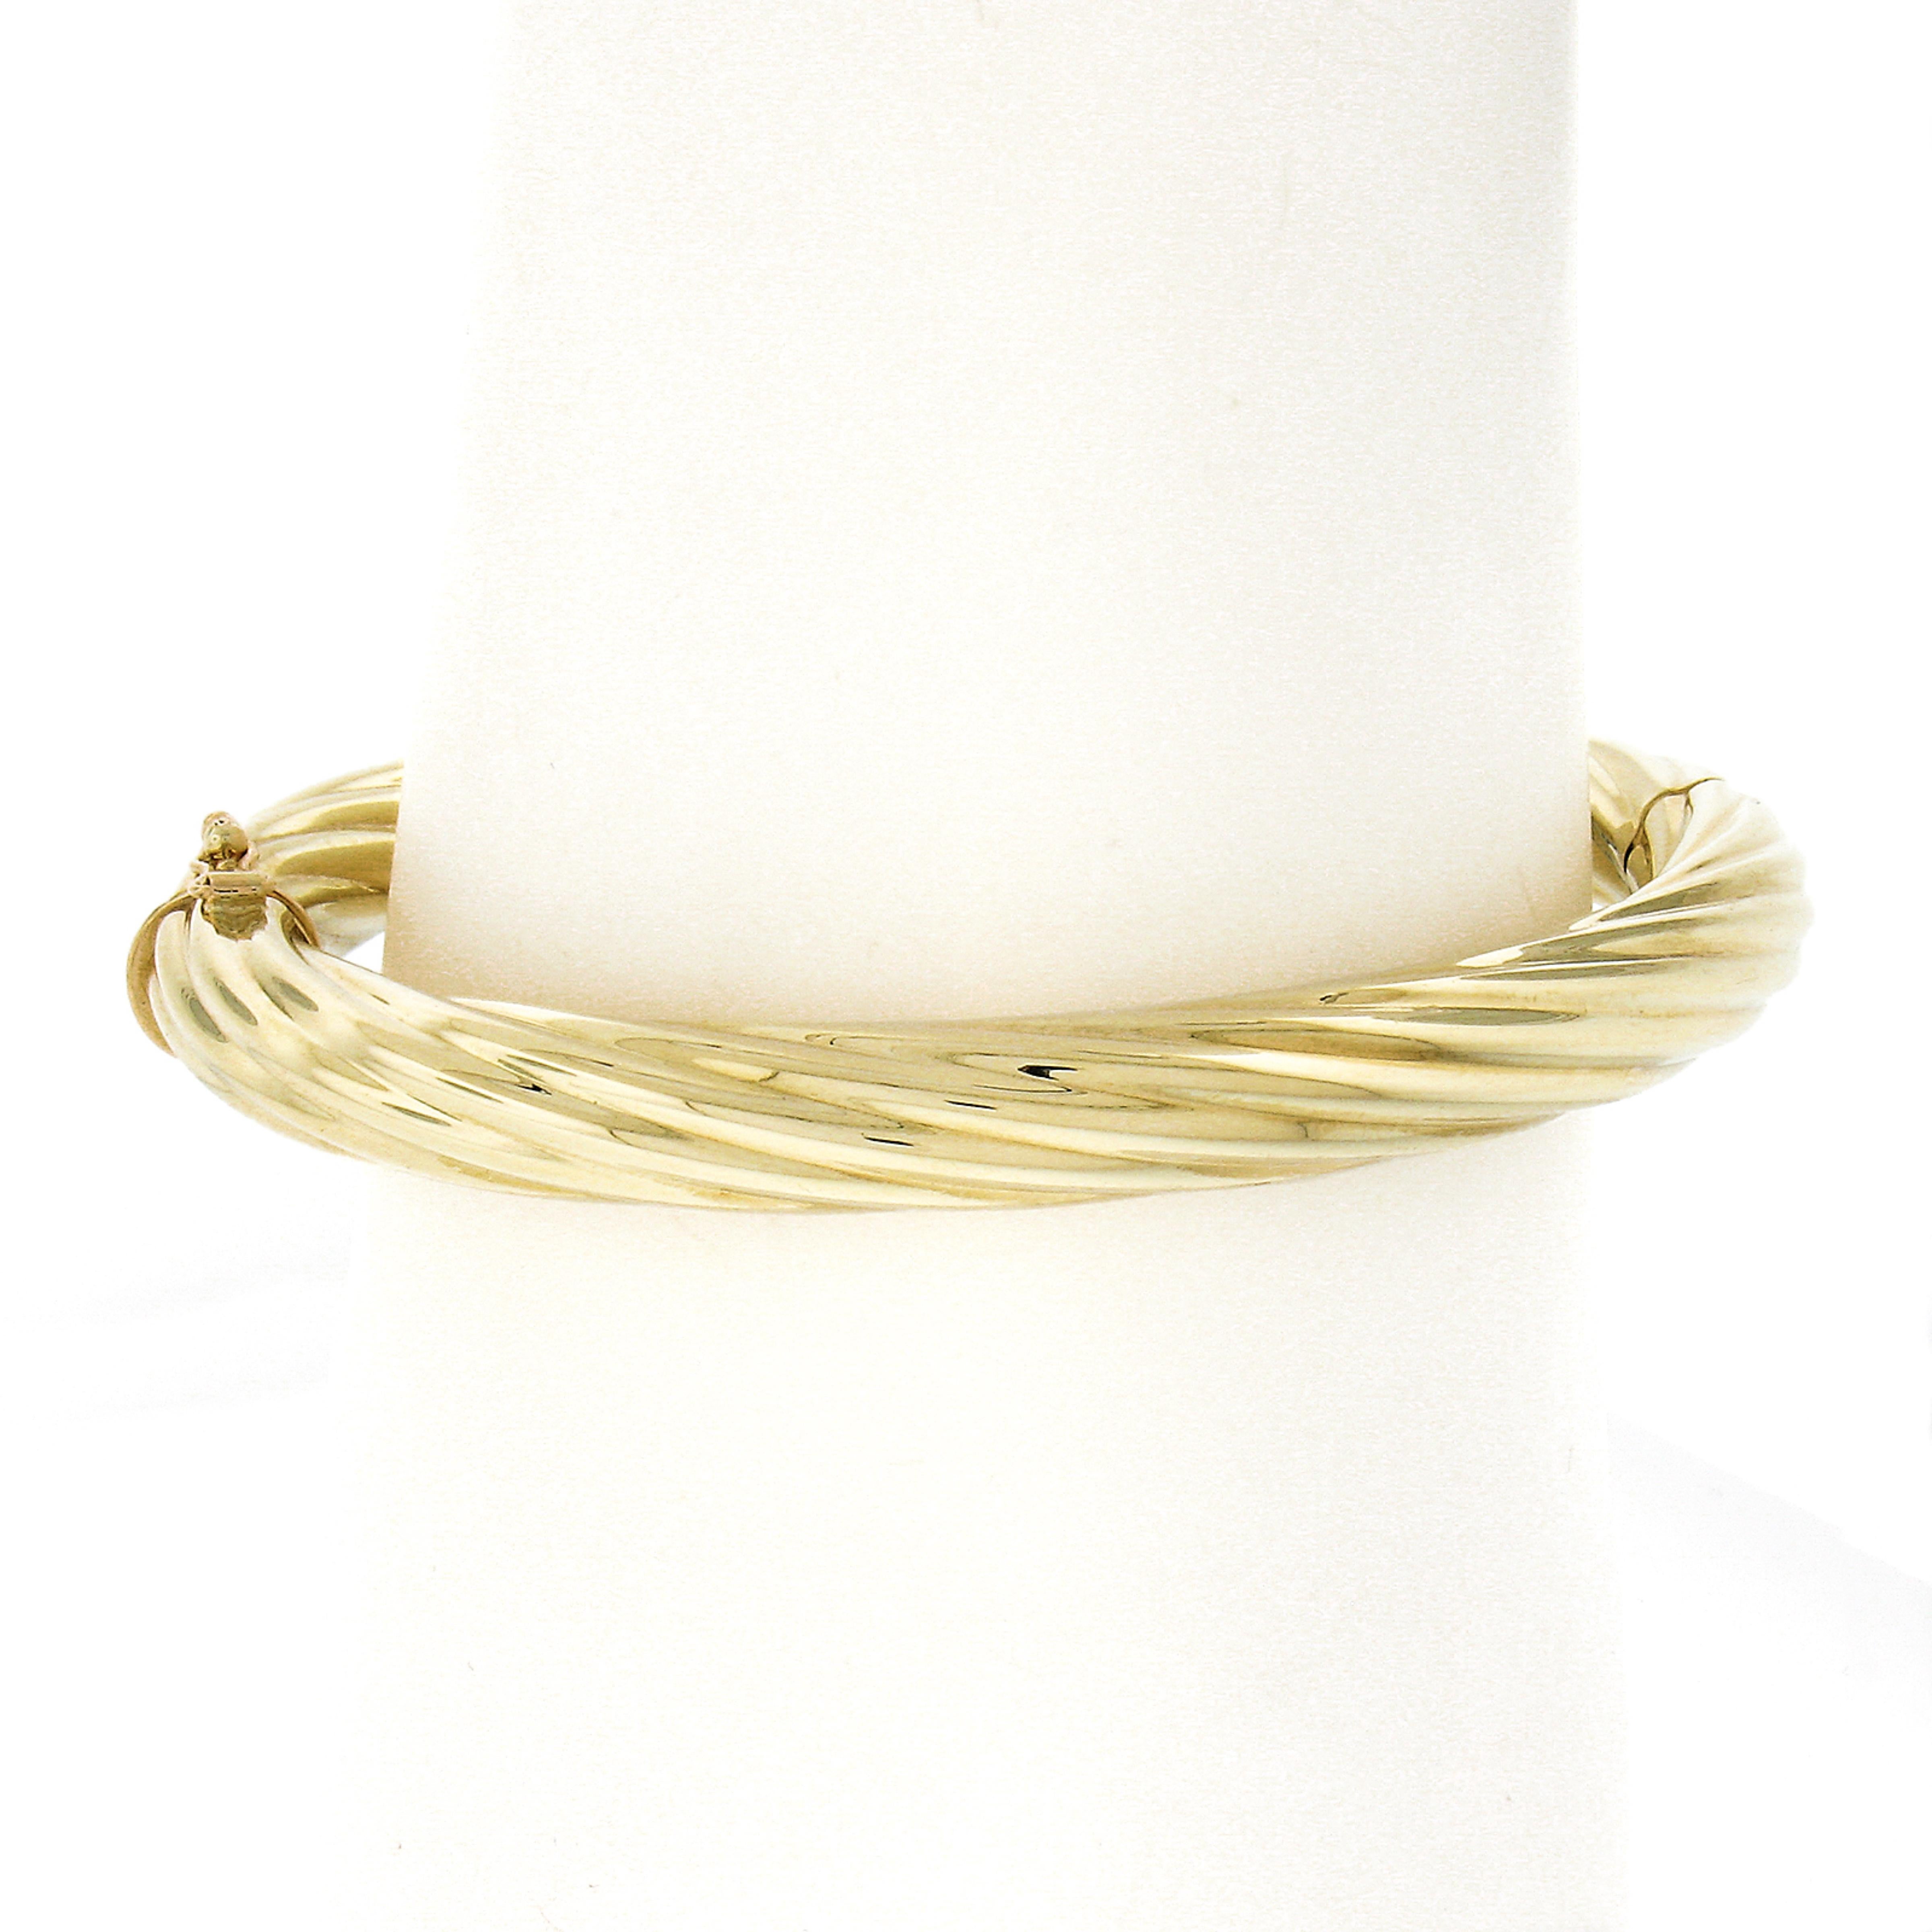 Material: Solid 14K Yellow Gold
Weight: 21 Grams
Type: Hinged Open Bangle Bracelet
Length: Will fit up to a 7.25 inch wrist (fitted on a wrist)
Clasp: Push Clasp w/ Safety Latch
Width: 7.9mm 
Thickness: 7.8mm rise off the wrist (approx.)
Stamp: 14K